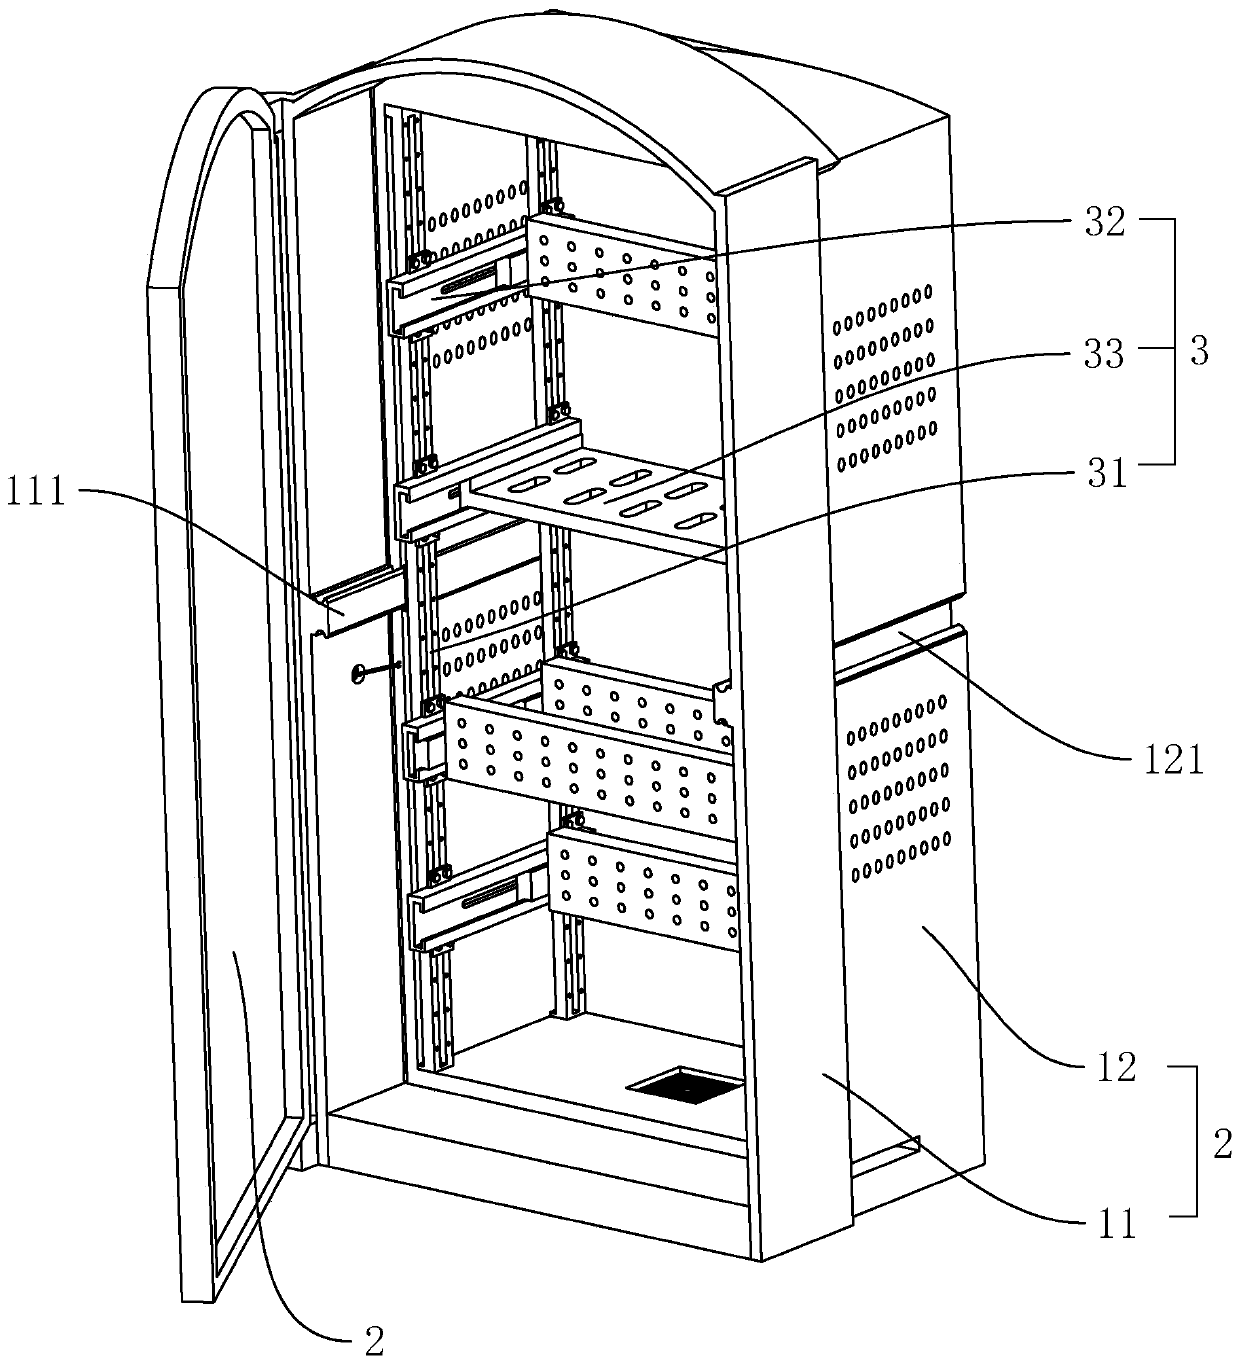 Power distribution cabinet convenient to install